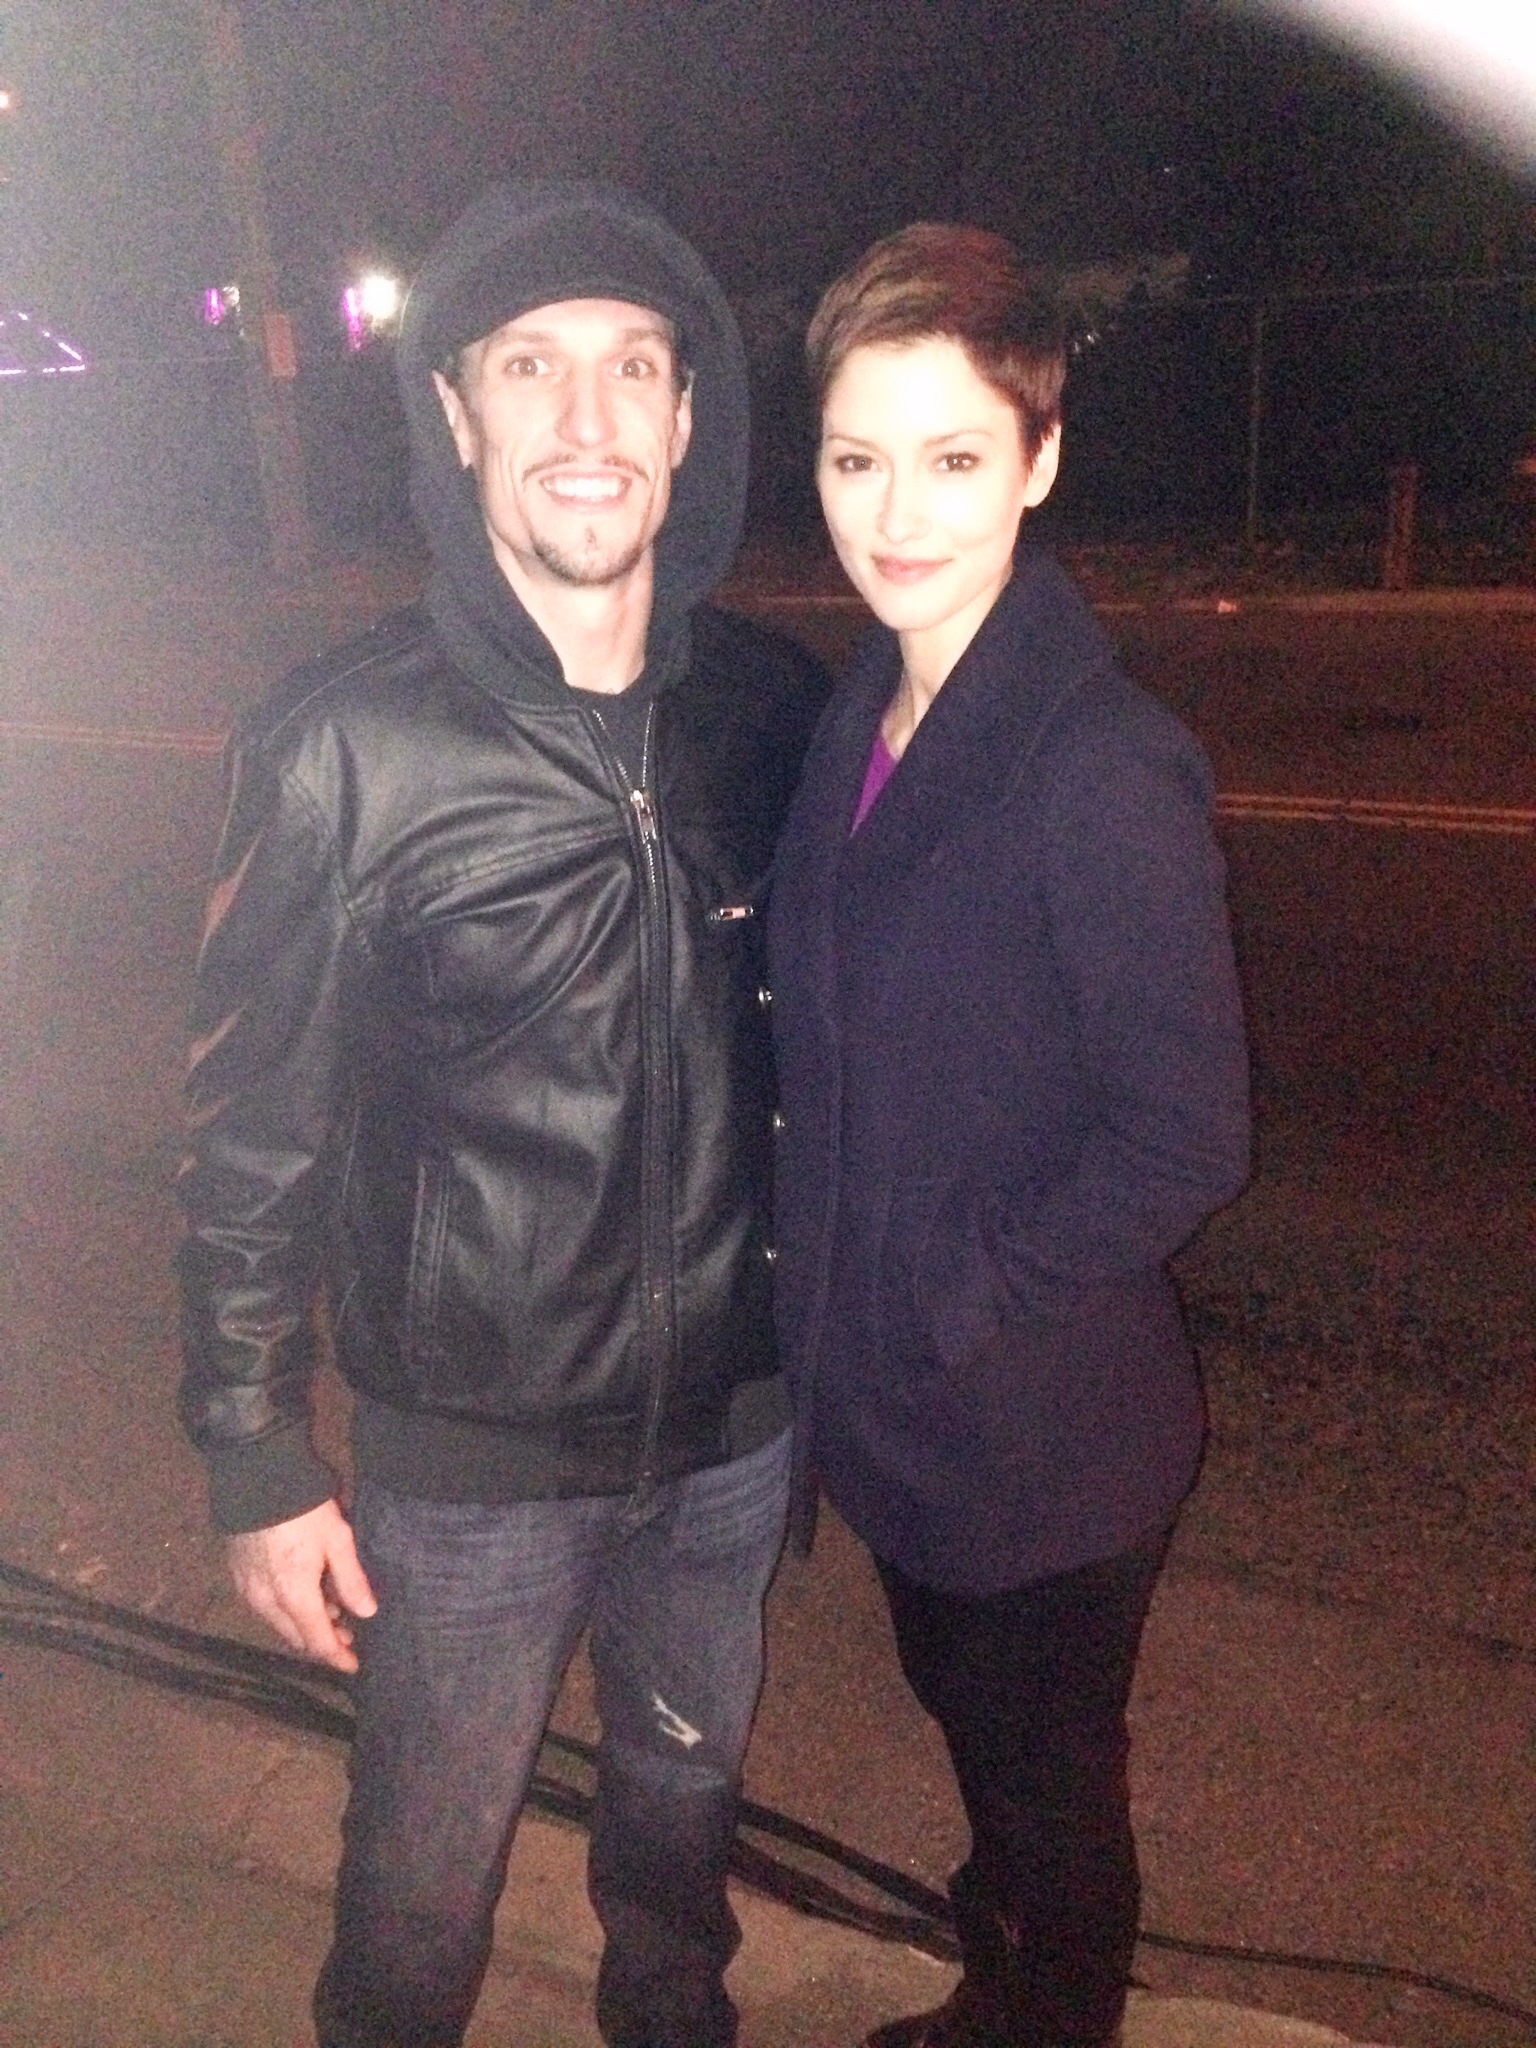 Chyler Leigh & Patrick Brana on the set of Taxi Brooklyn South (2013).